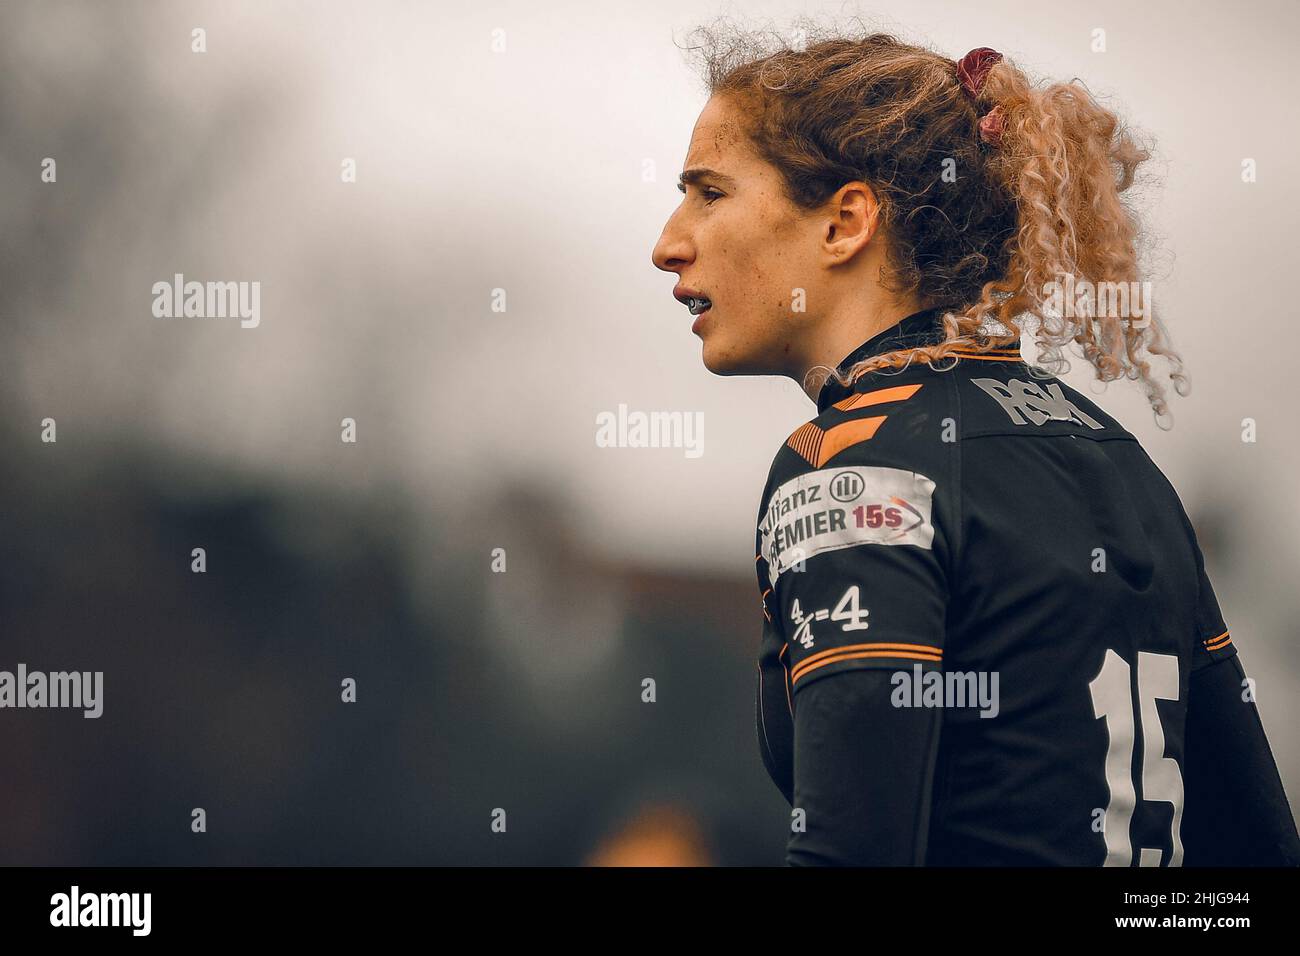 London, UK. 29th Jan, 2022. London, January 28th 2022 Abi Dow During the Allianz Premier 15s game between Wasps Women & Exeter Chiefs at Twyford Avenue Sports Ground in London, England Karl W Newton/Sports Press Photo Credit: SPP Sport Press Photo. /Alamy Live News Stock Photo